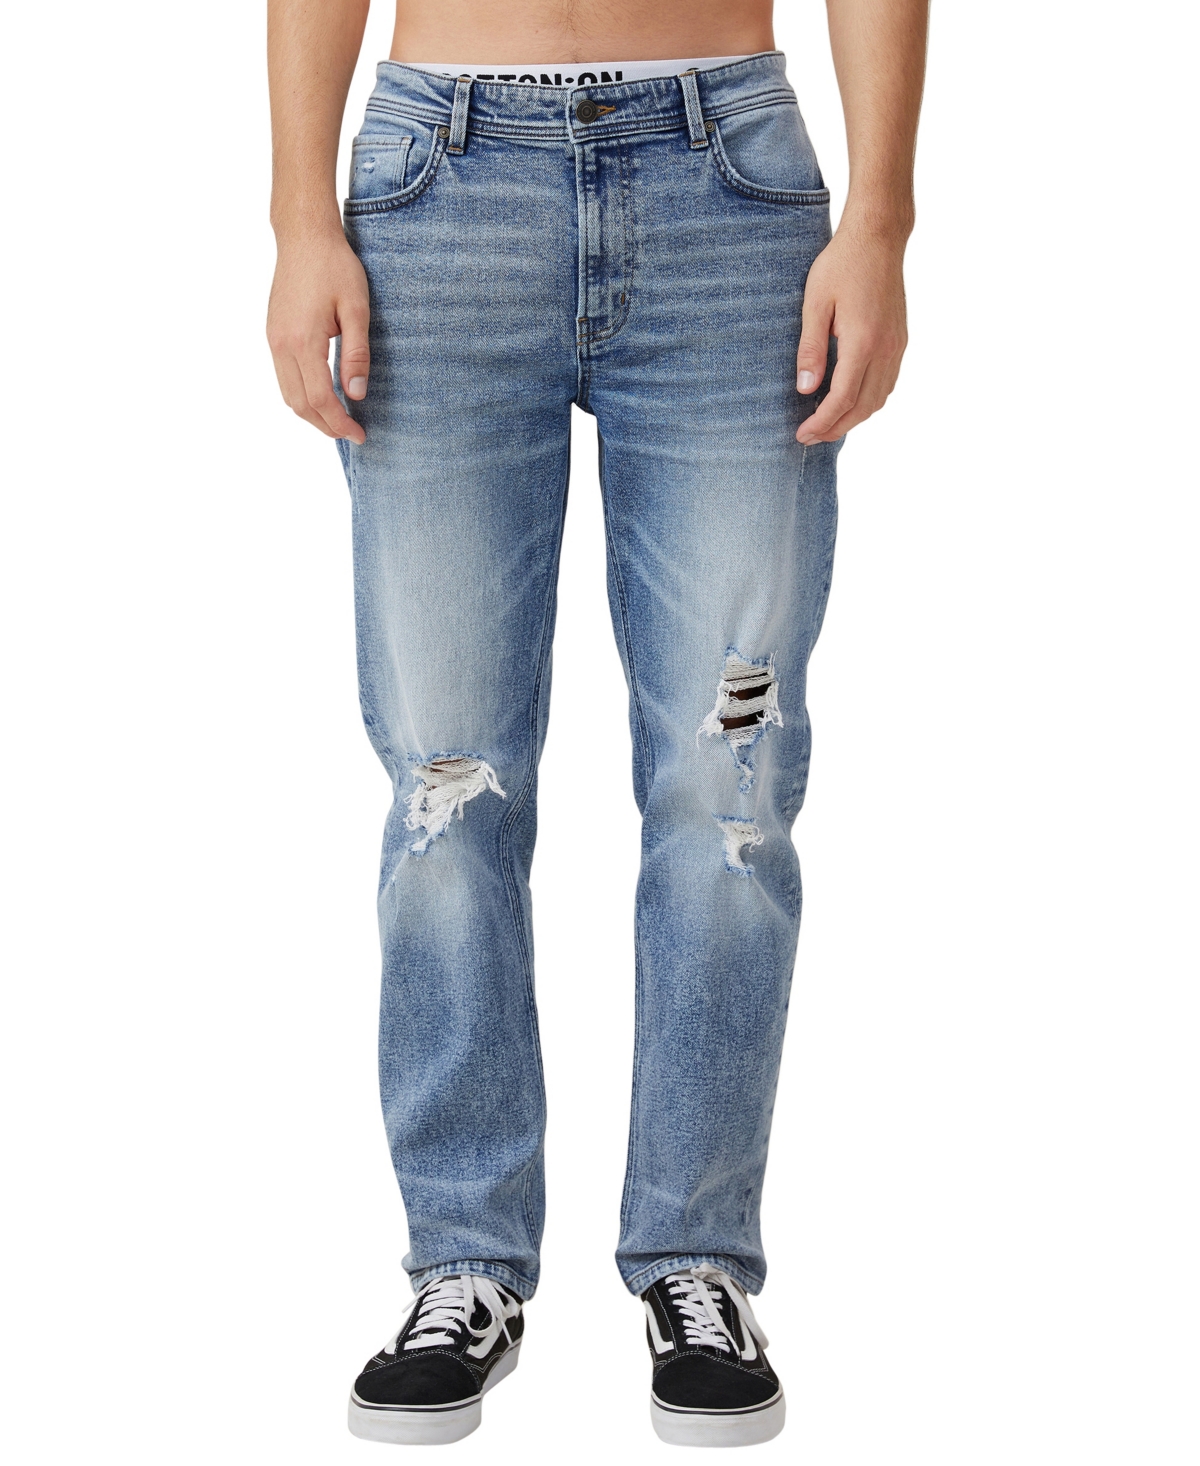 Cotton On Men's Slim Straight Jeans In West Blue Ripped